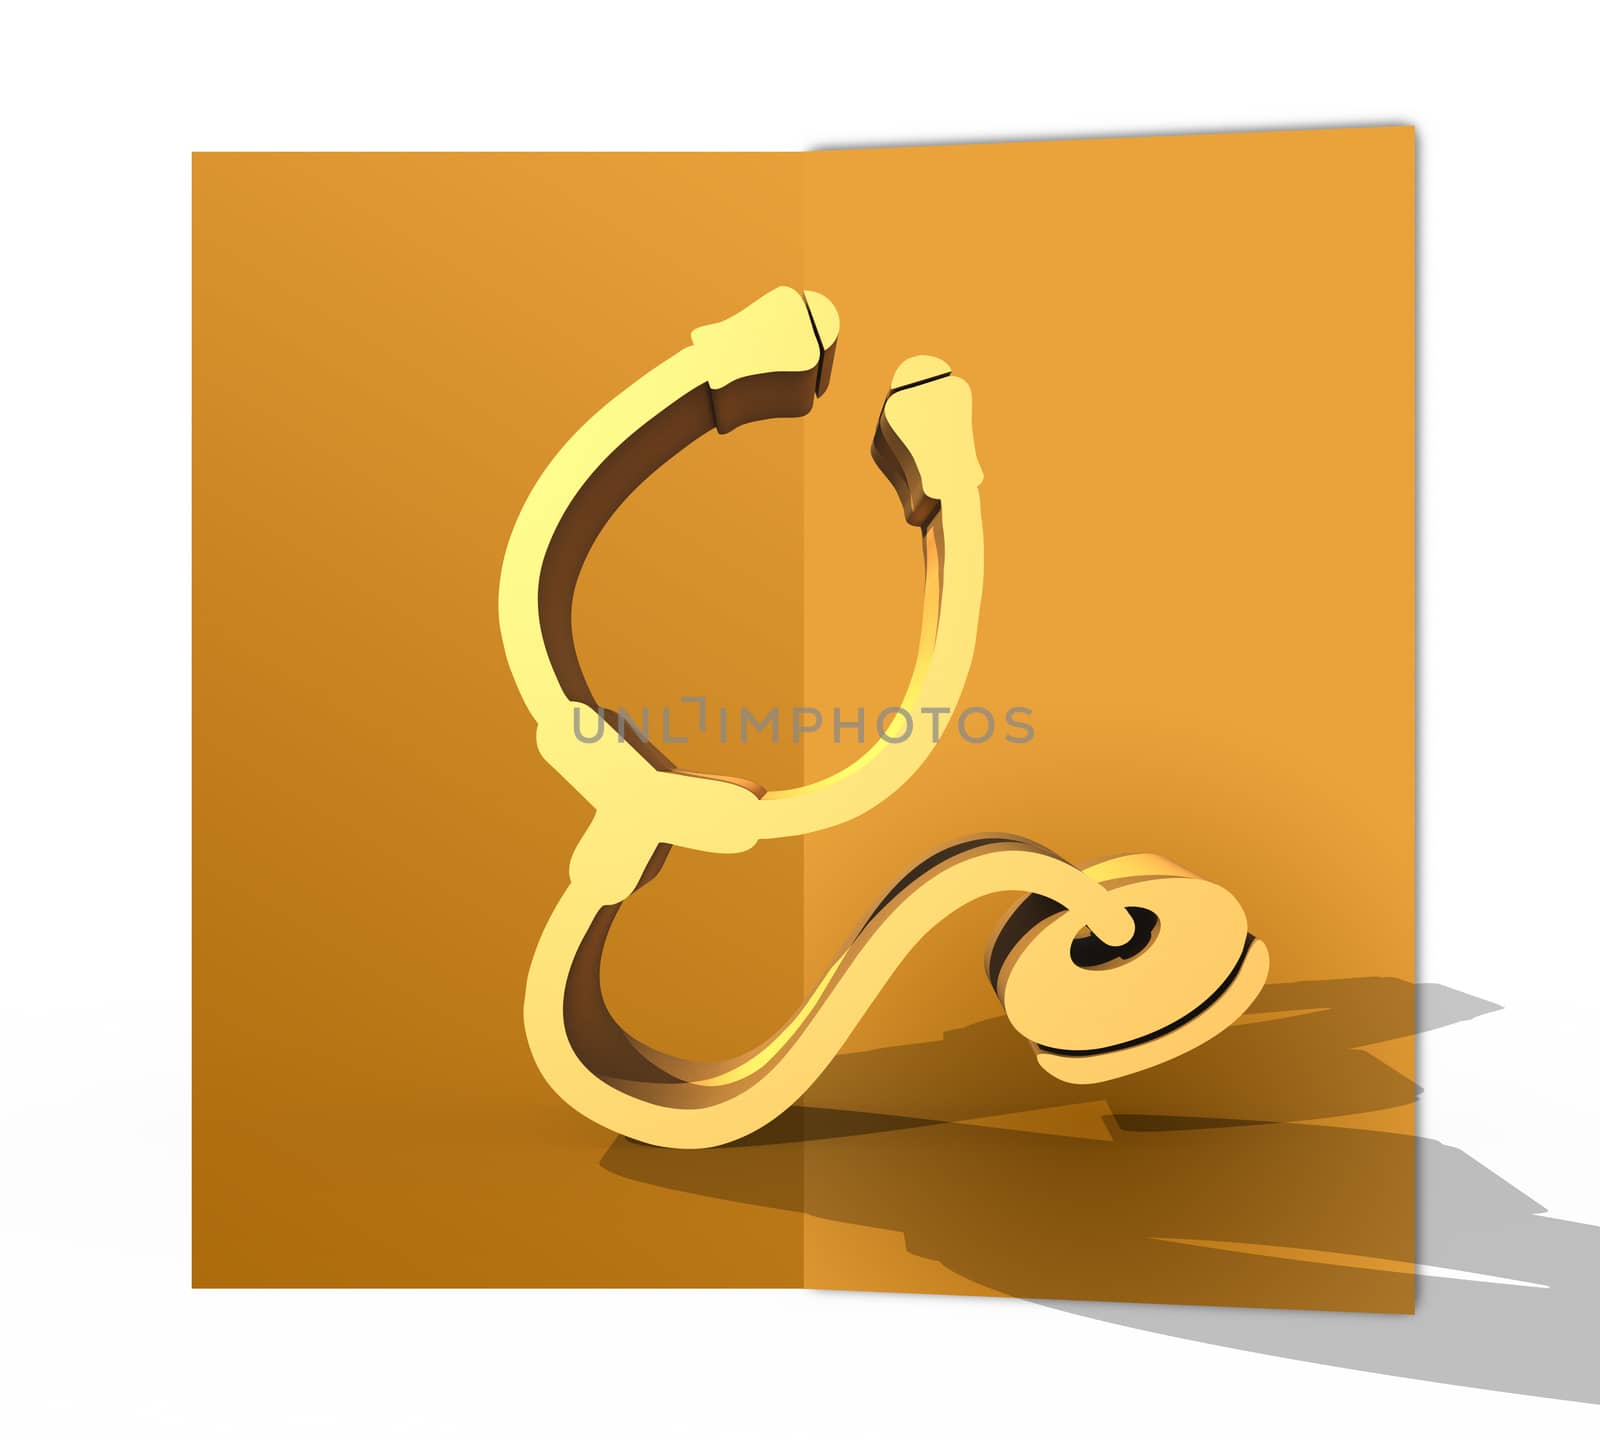 Folded card with stethoscope symbol by payphoto